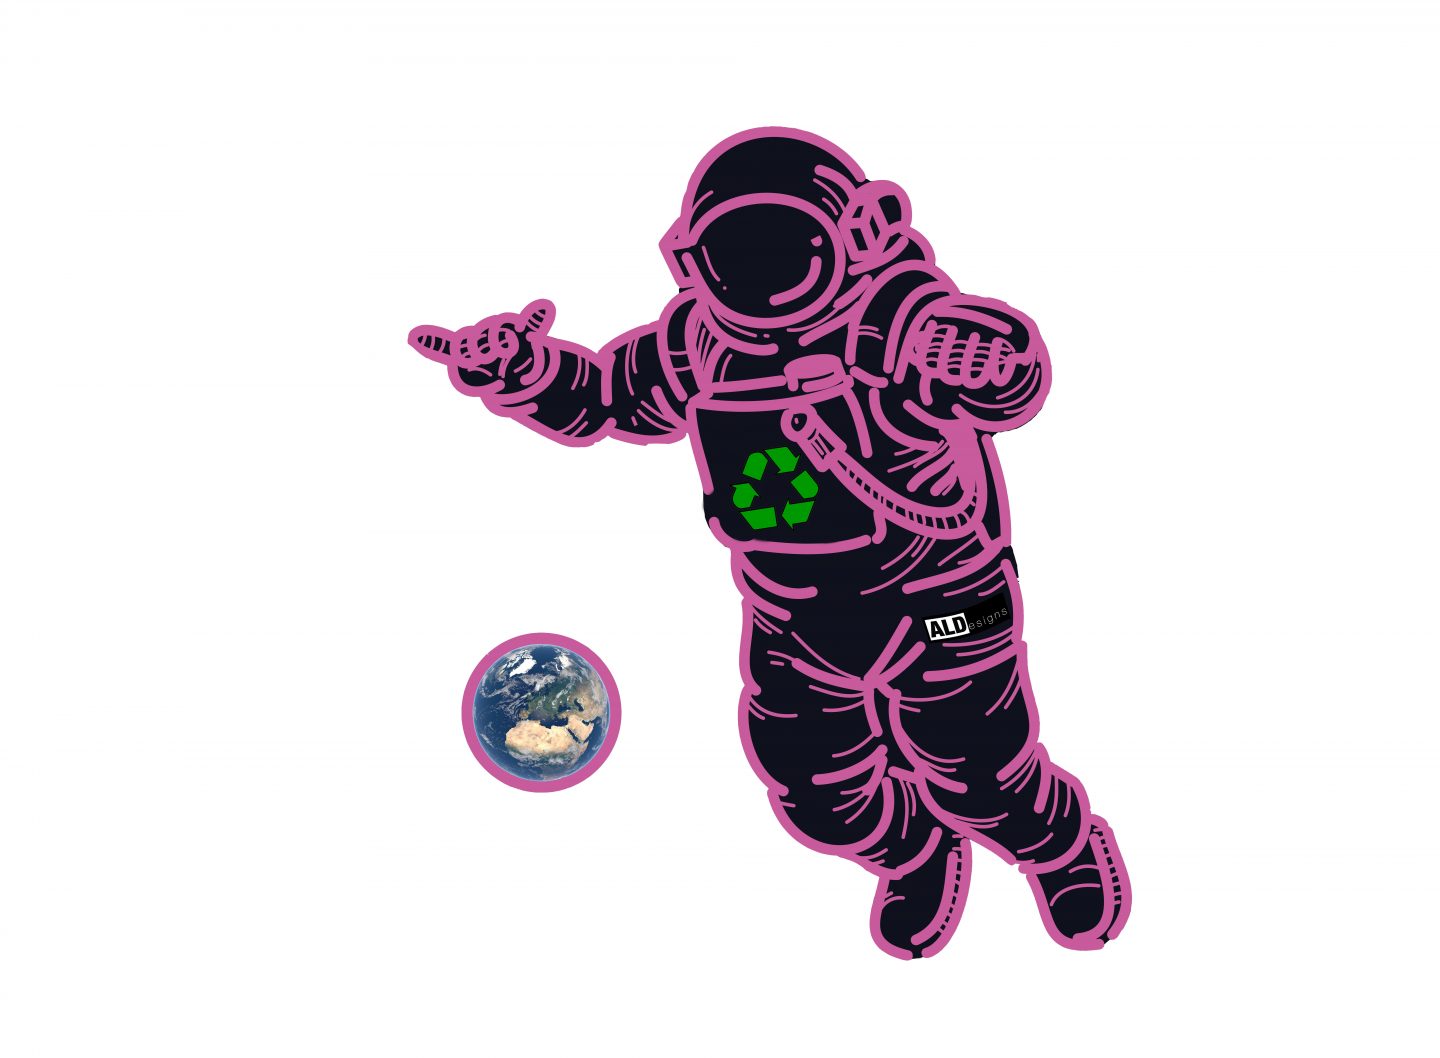 ALDesigns print of astronaut with small planet Earth